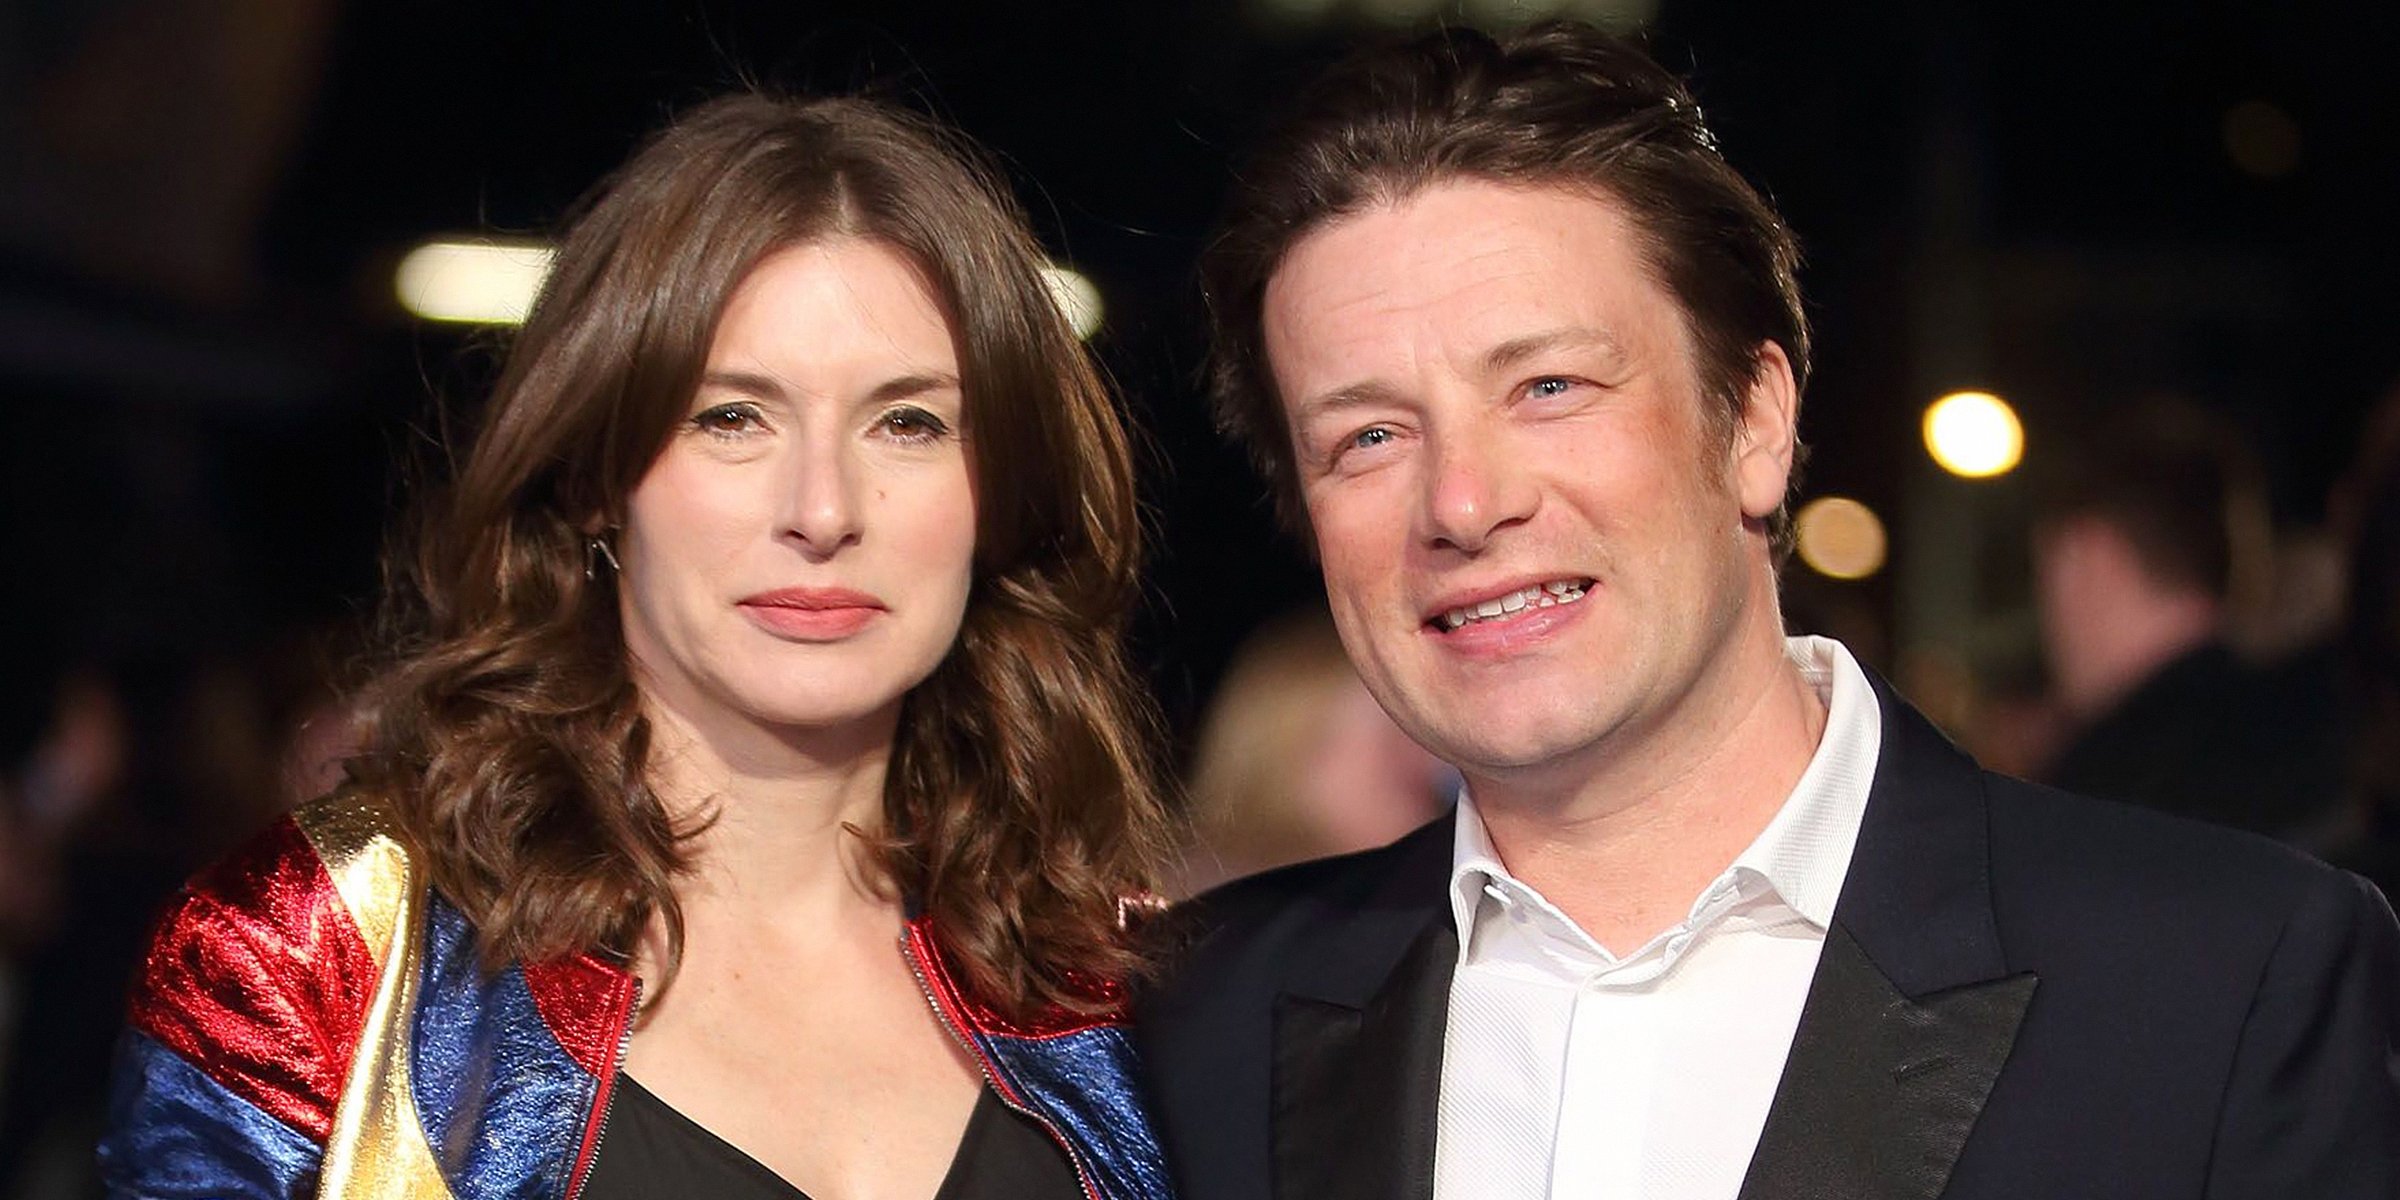 Juliette Norton and Jamie Oliver | Source: Getty Images